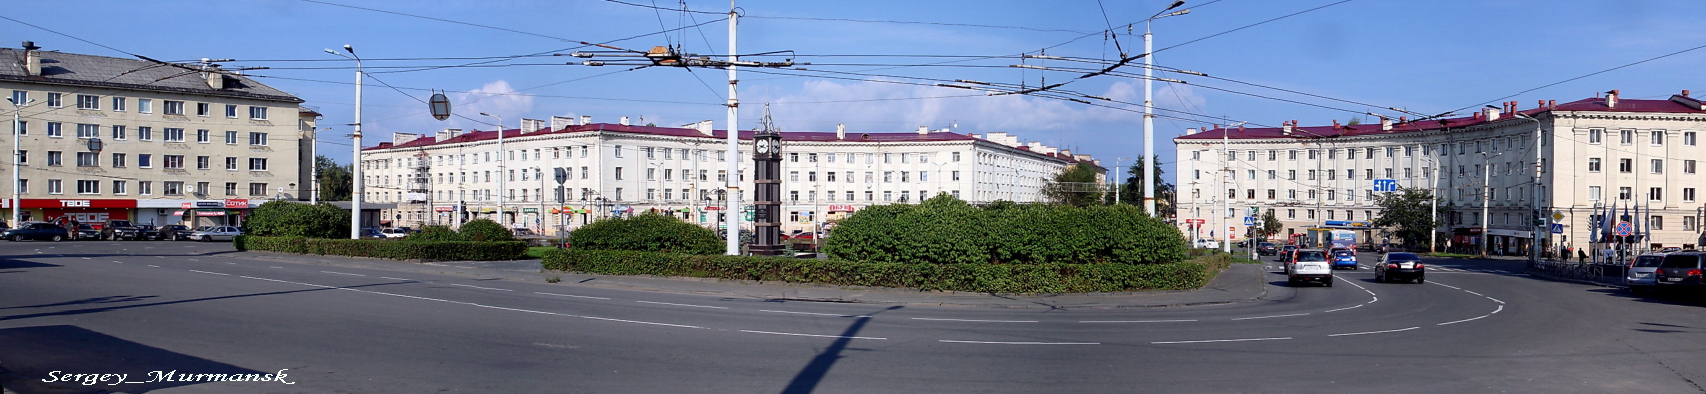 Petrozavodsk — Miscellaneous photos; Petrozavodsk — Trolleybus Lines and Infrastructure